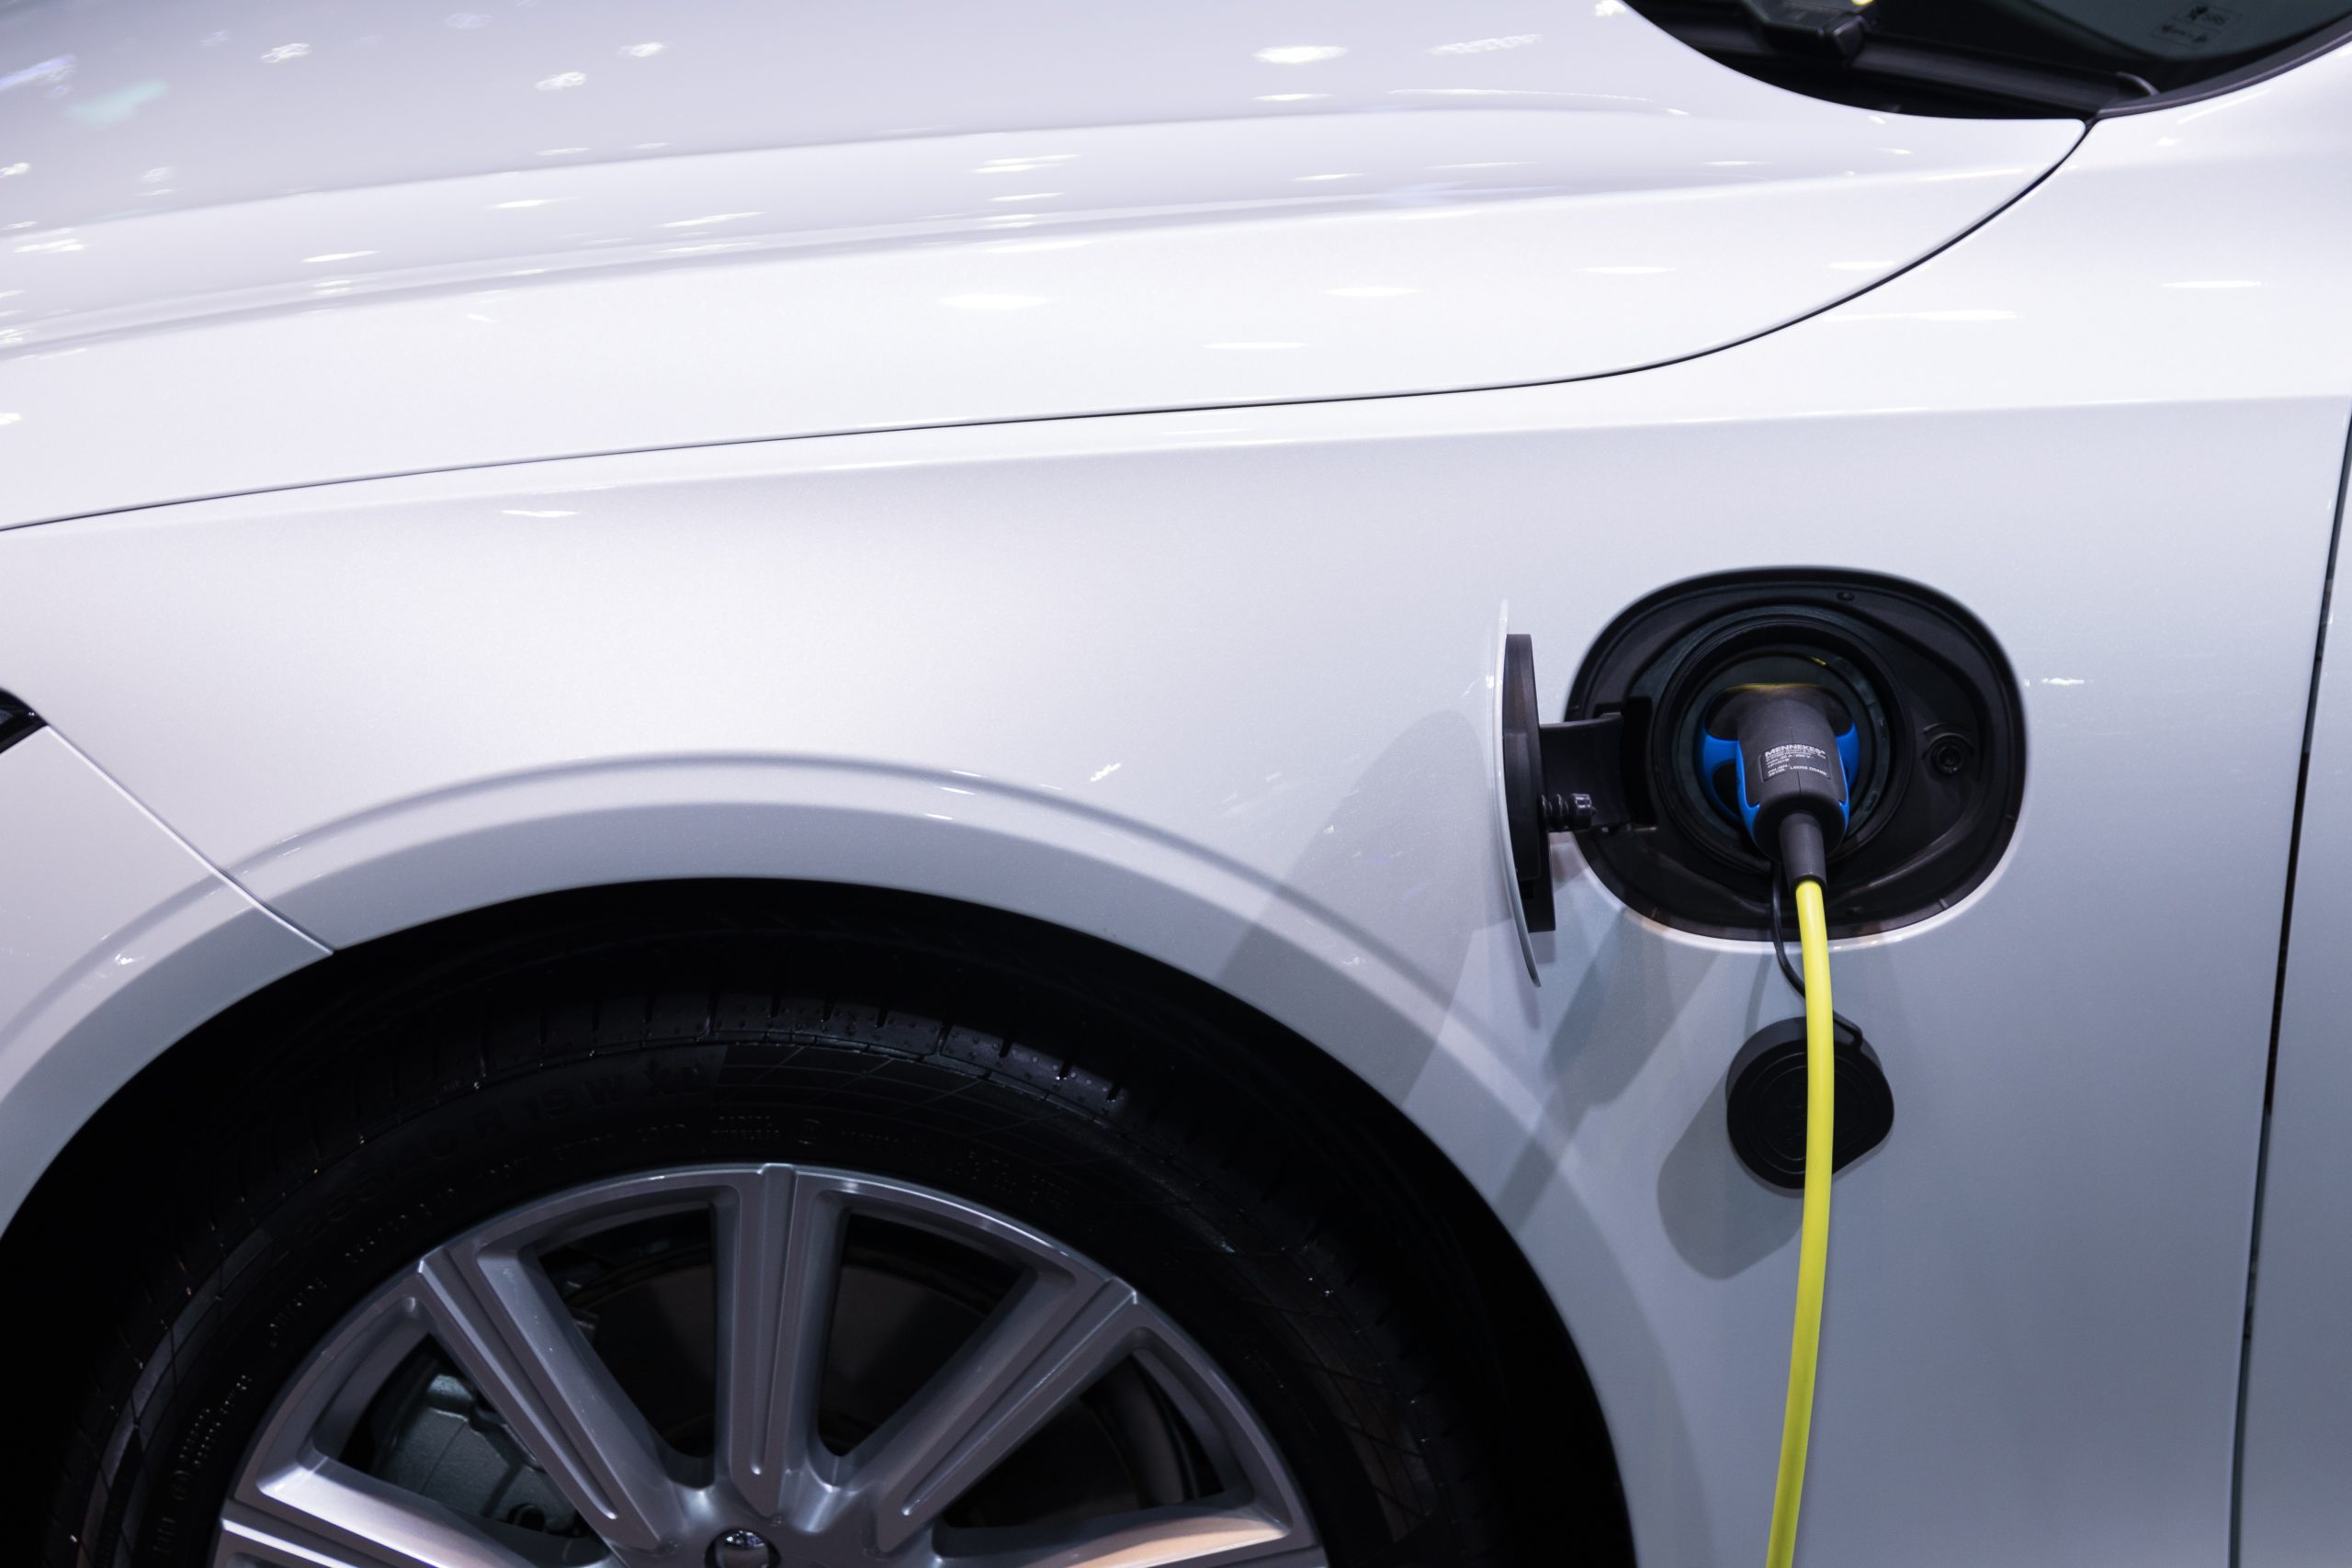 image of an EV charger plugged into a car